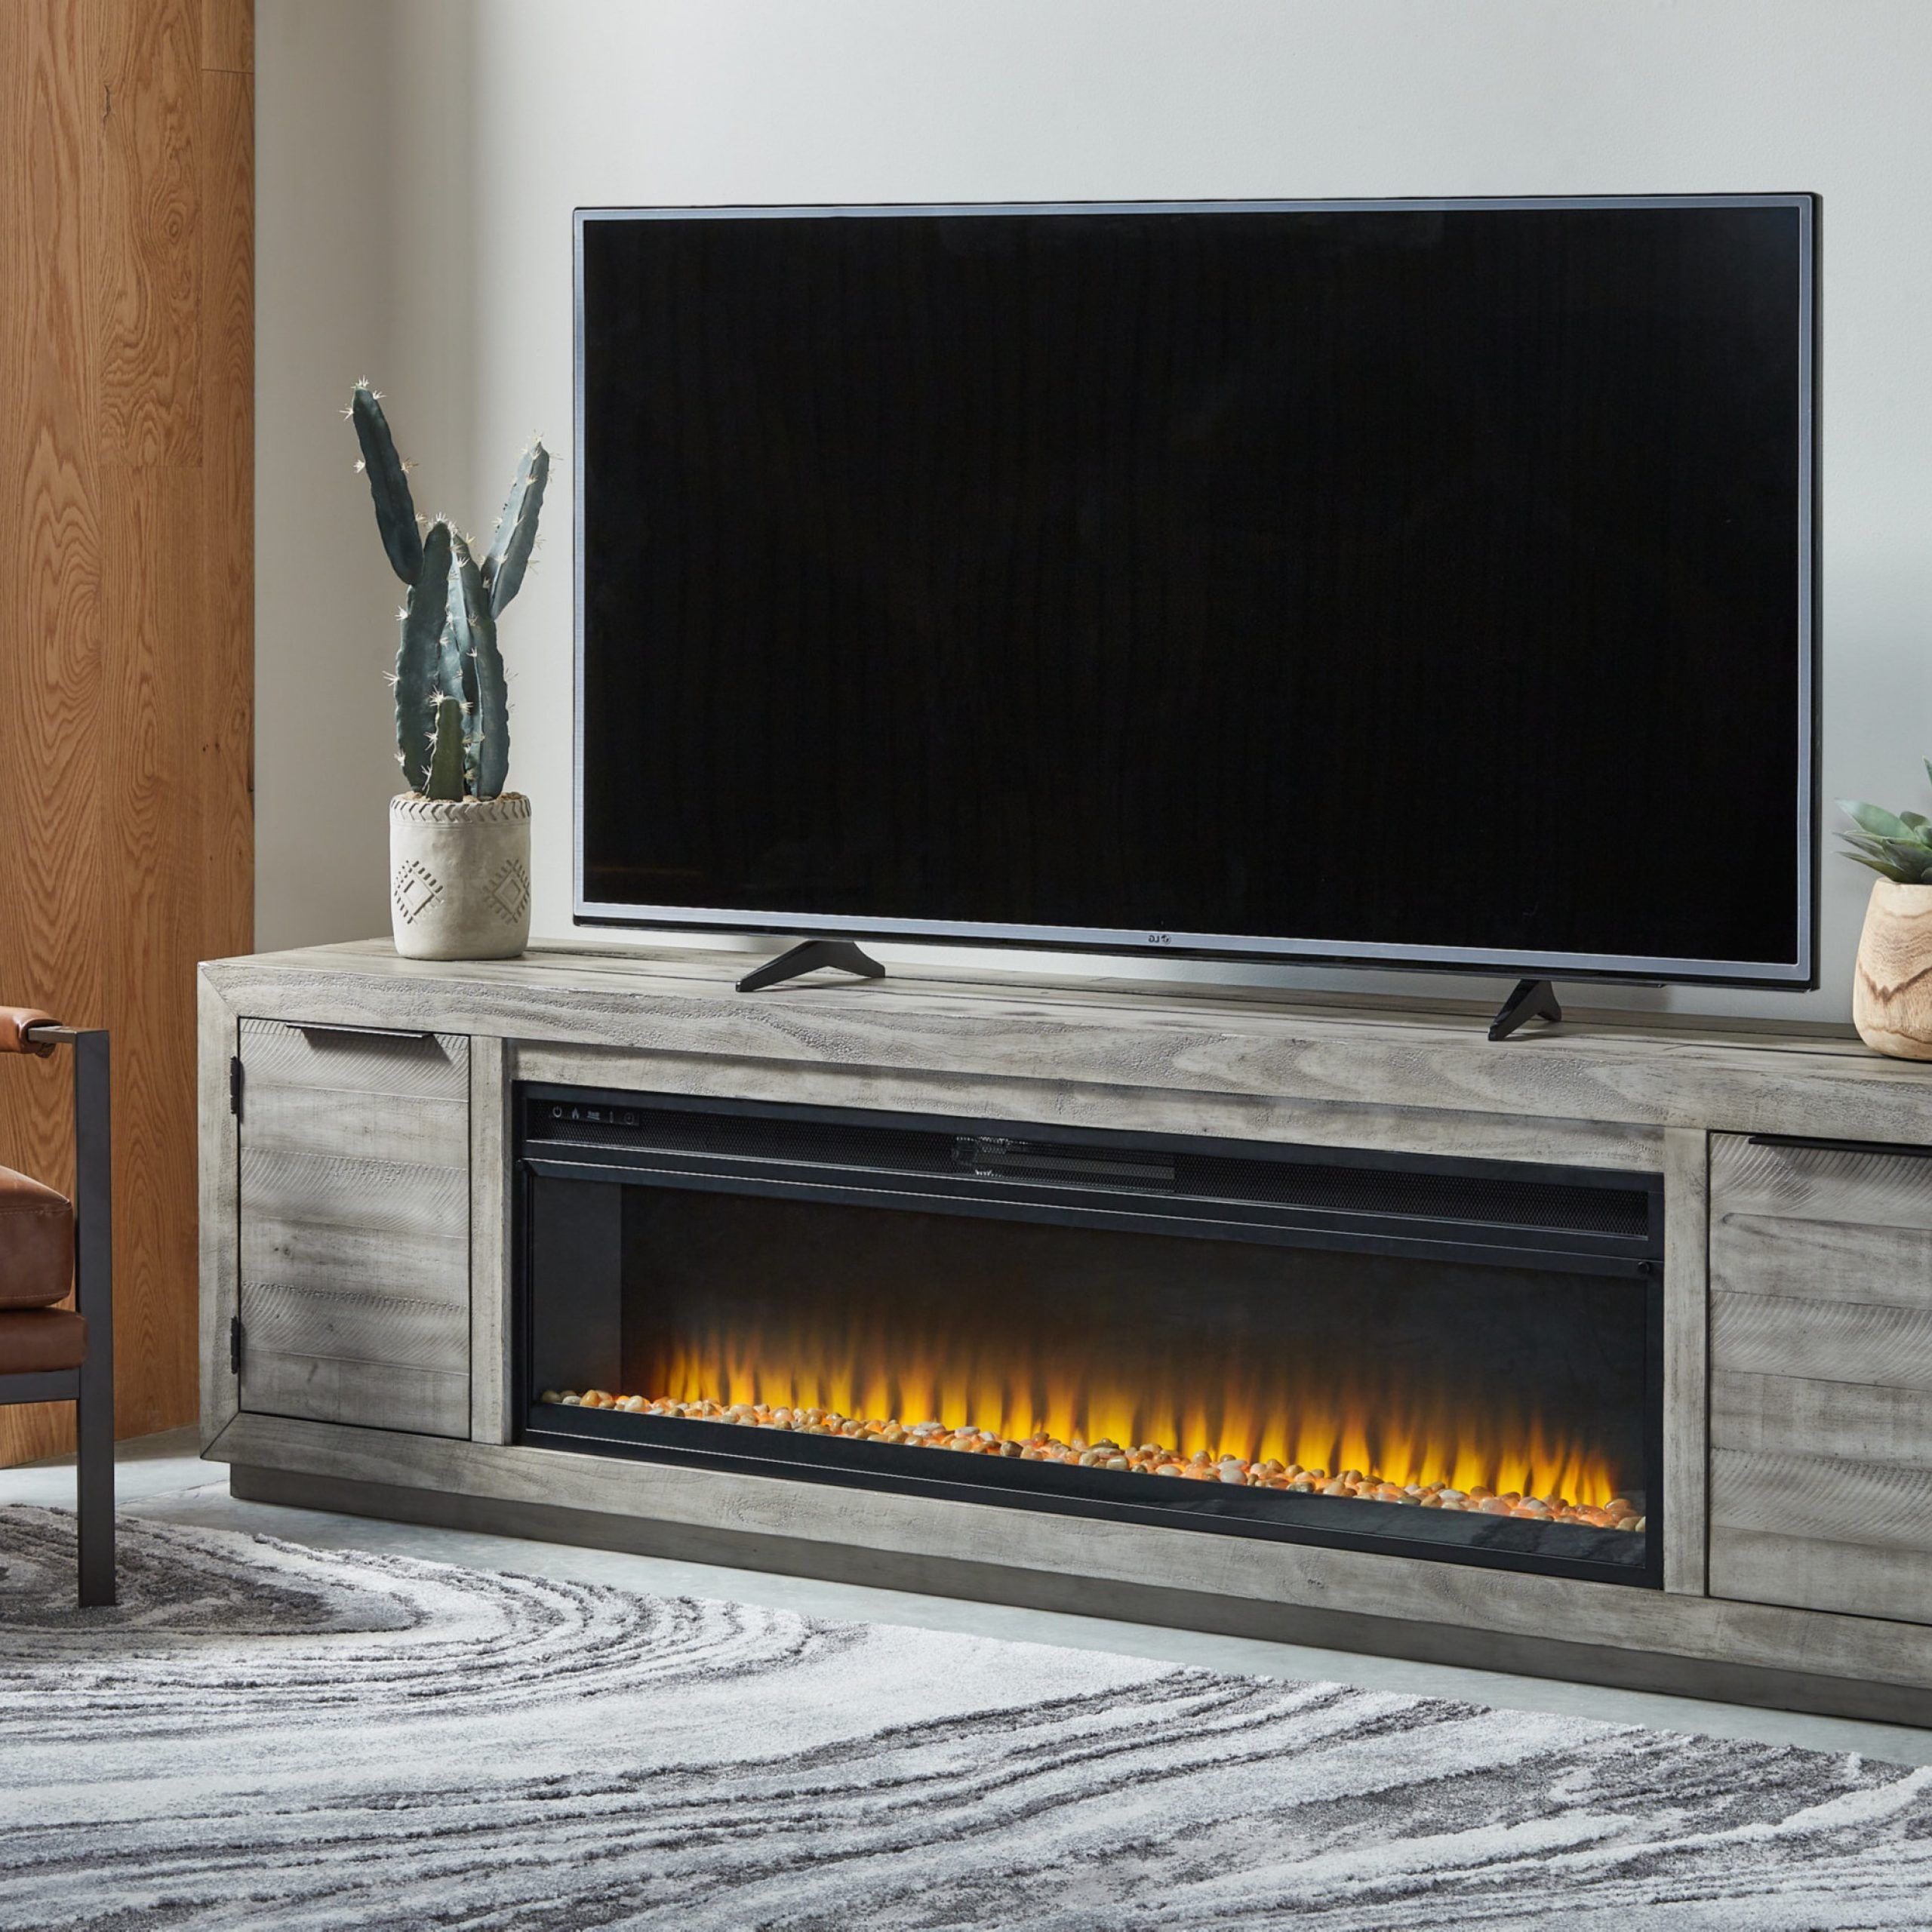 Signature Designashley Naydell Tv Stand For Tvs Up To 88" With Electric  Fireplace Included & Reviews | Wayfair For Electric Fireplace Entertainment Centers (Gallery 11 of 20)